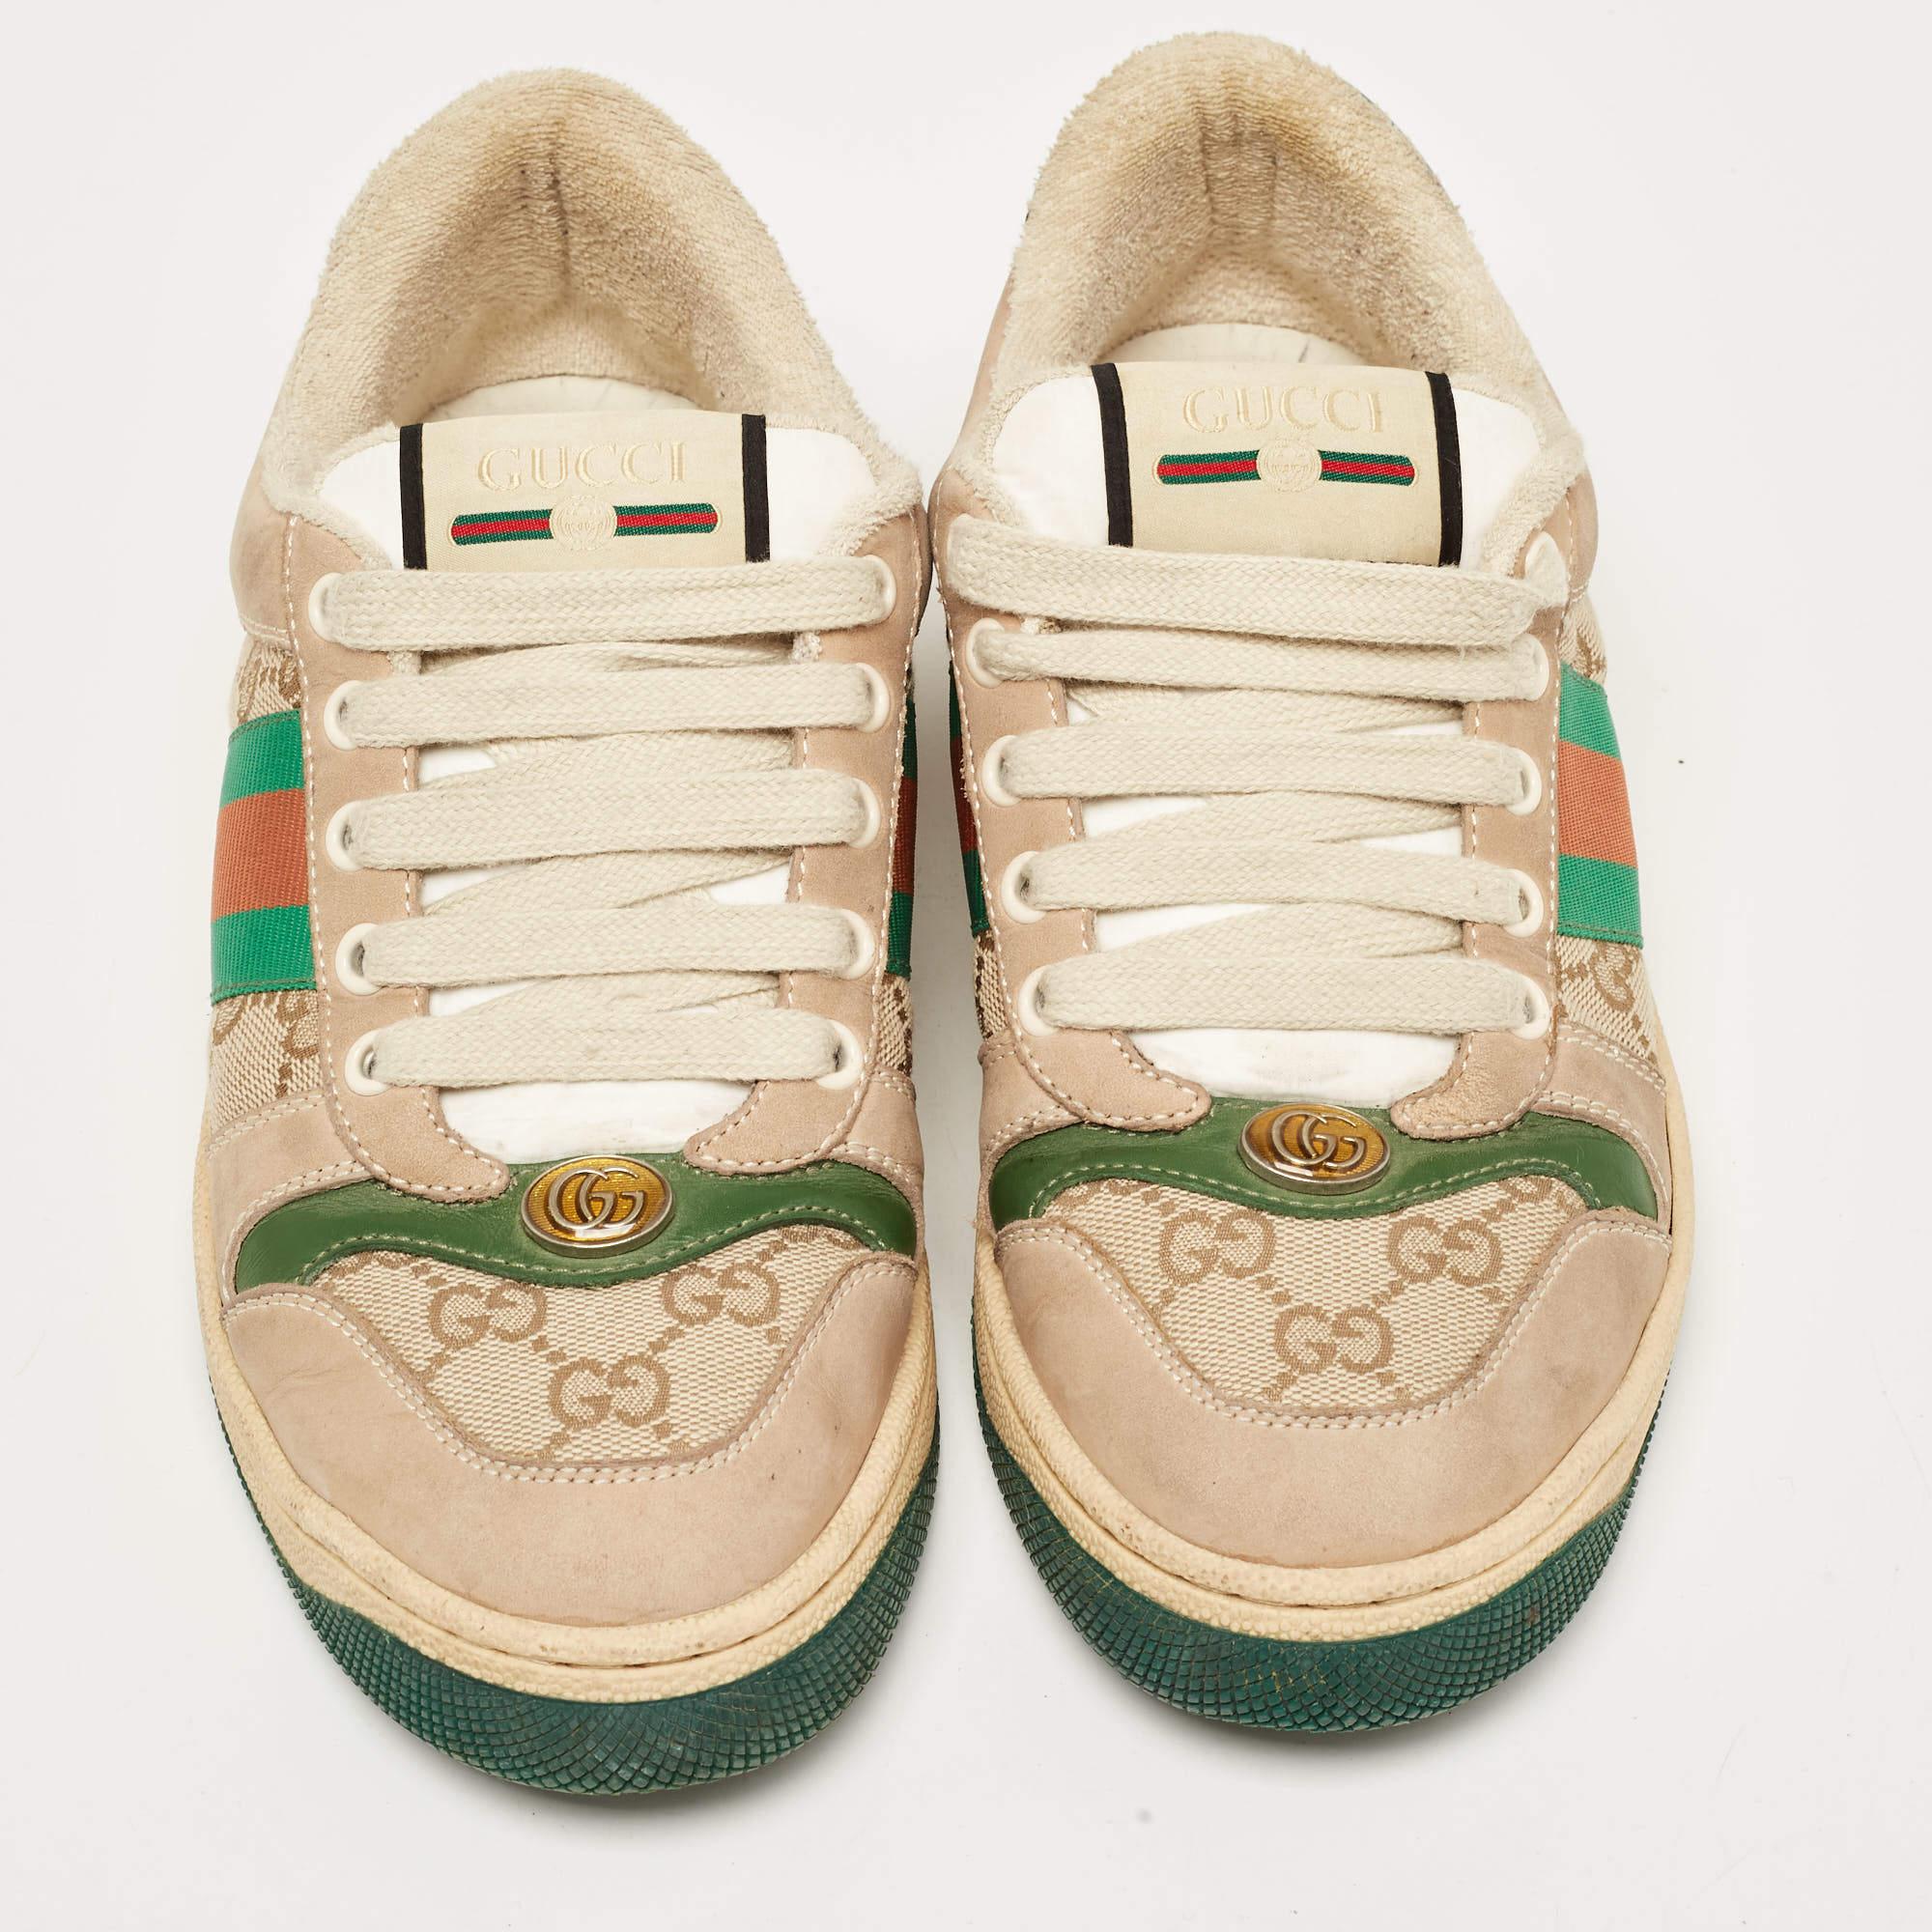 Gucci Multicolor Nubuck and Leather Screener Sneakers Size 37 3